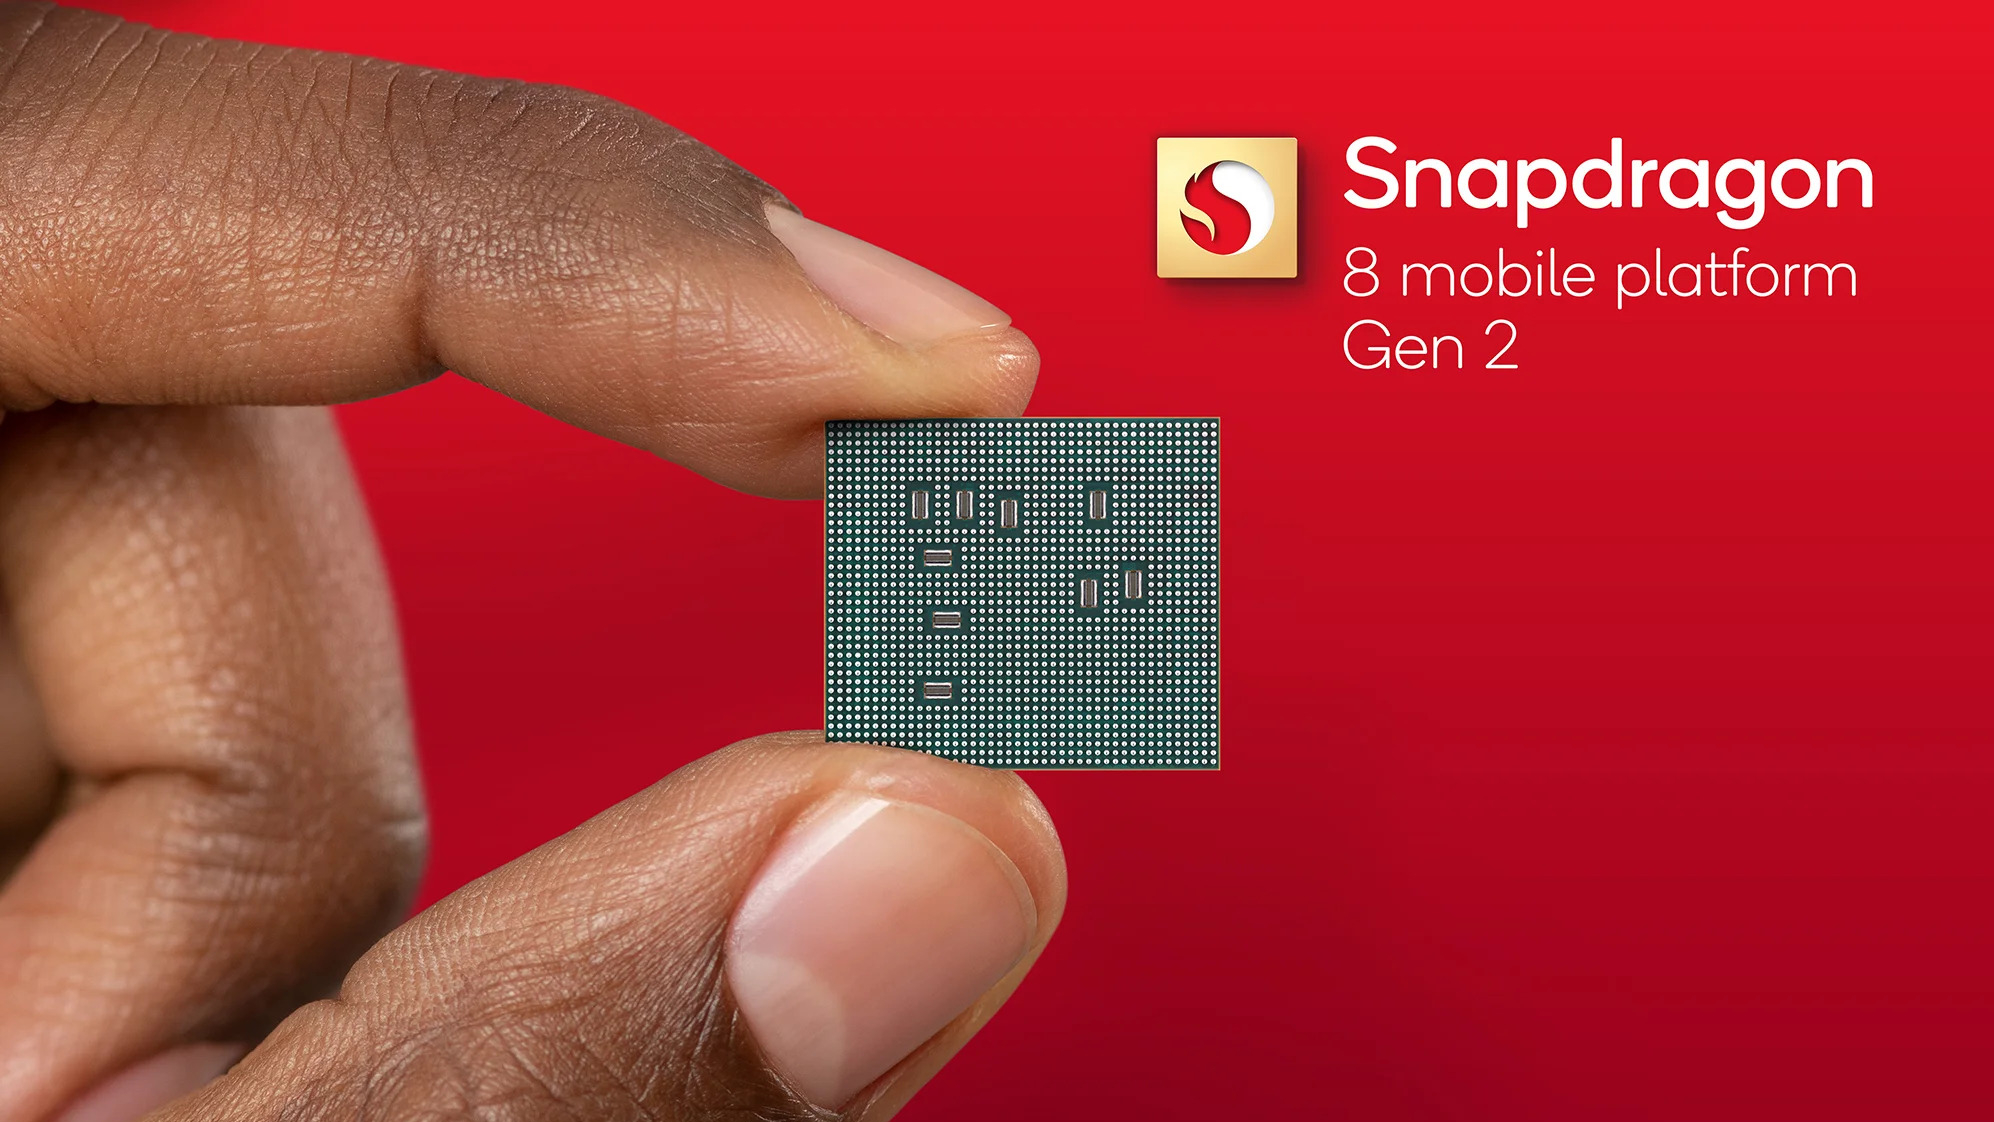 Image of fingers holding Qualcomm Snapdragon 8 Gen 2 chip on a red background